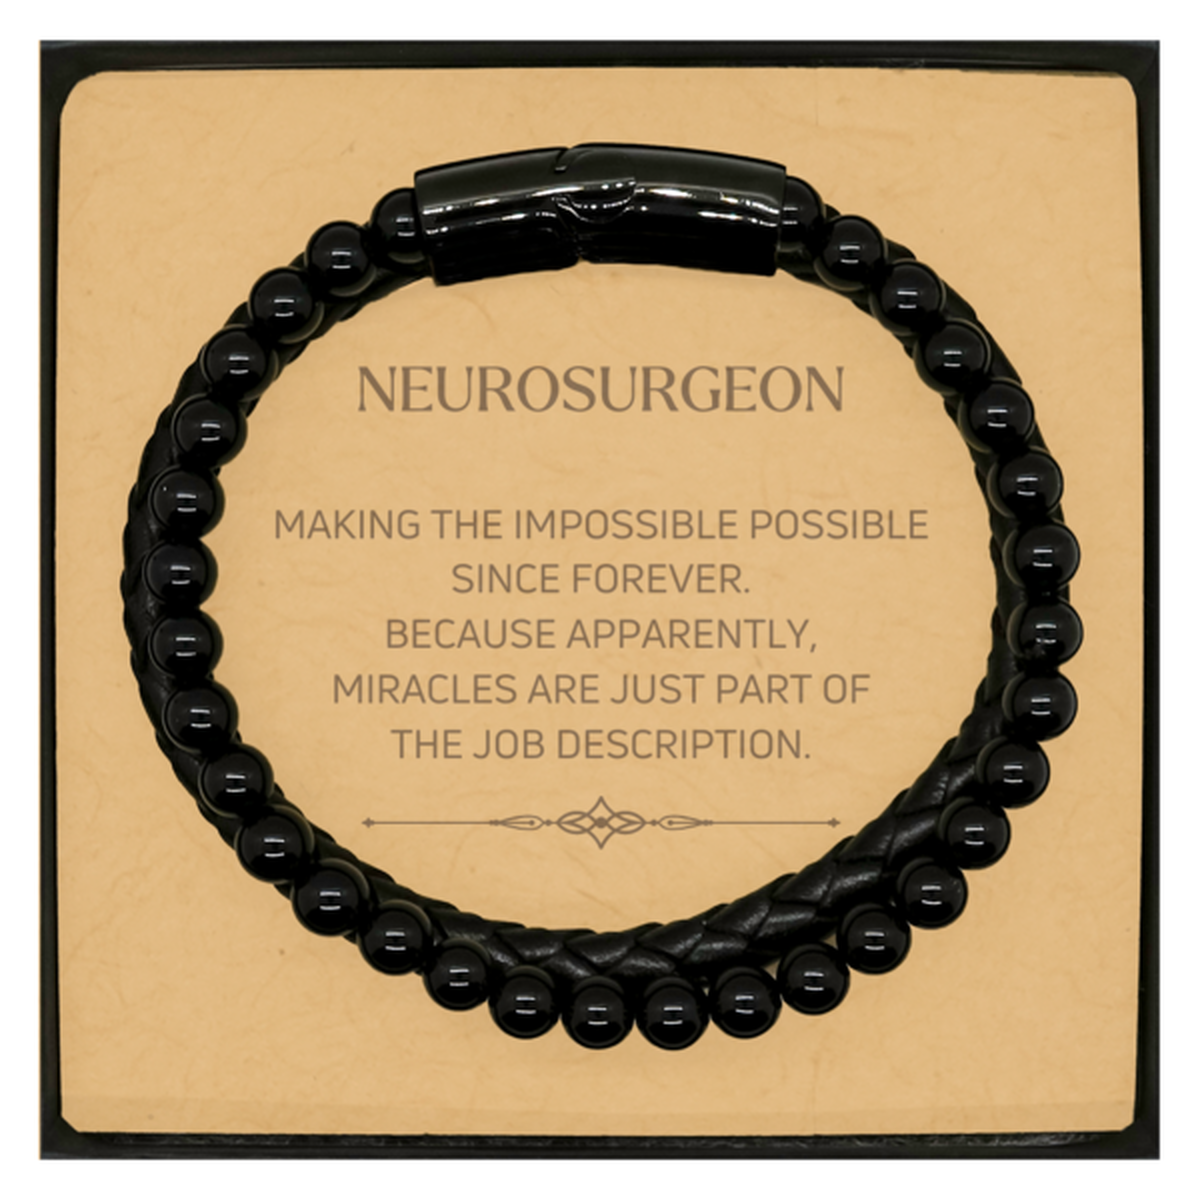 Funny Neurosurgeon Gifts, Miracles are just part of the job description, Inspirational Birthday Christmas Stone Leather Bracelets For Neurosurgeon, Men, Women, Coworkers, Friends, Boss